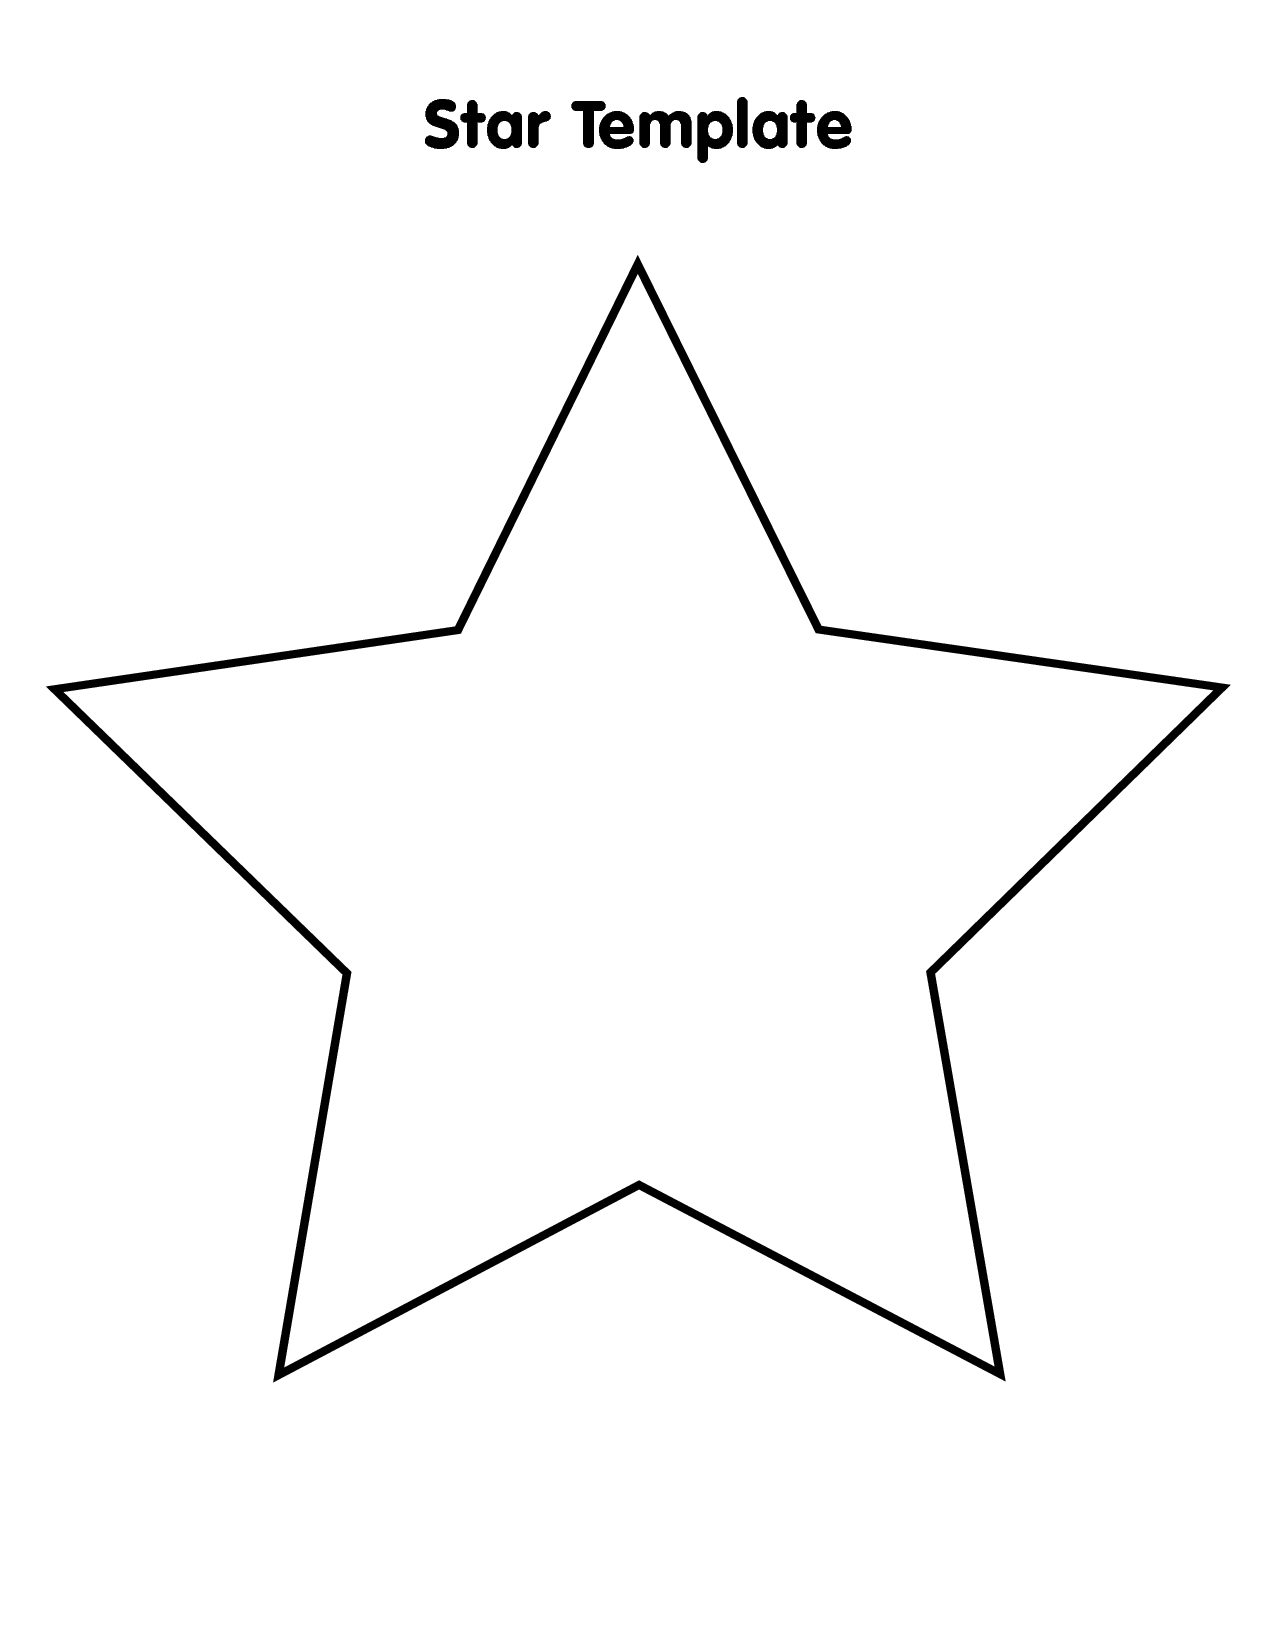 6-best-images-of-small-star-stencils-free-printable-large-star